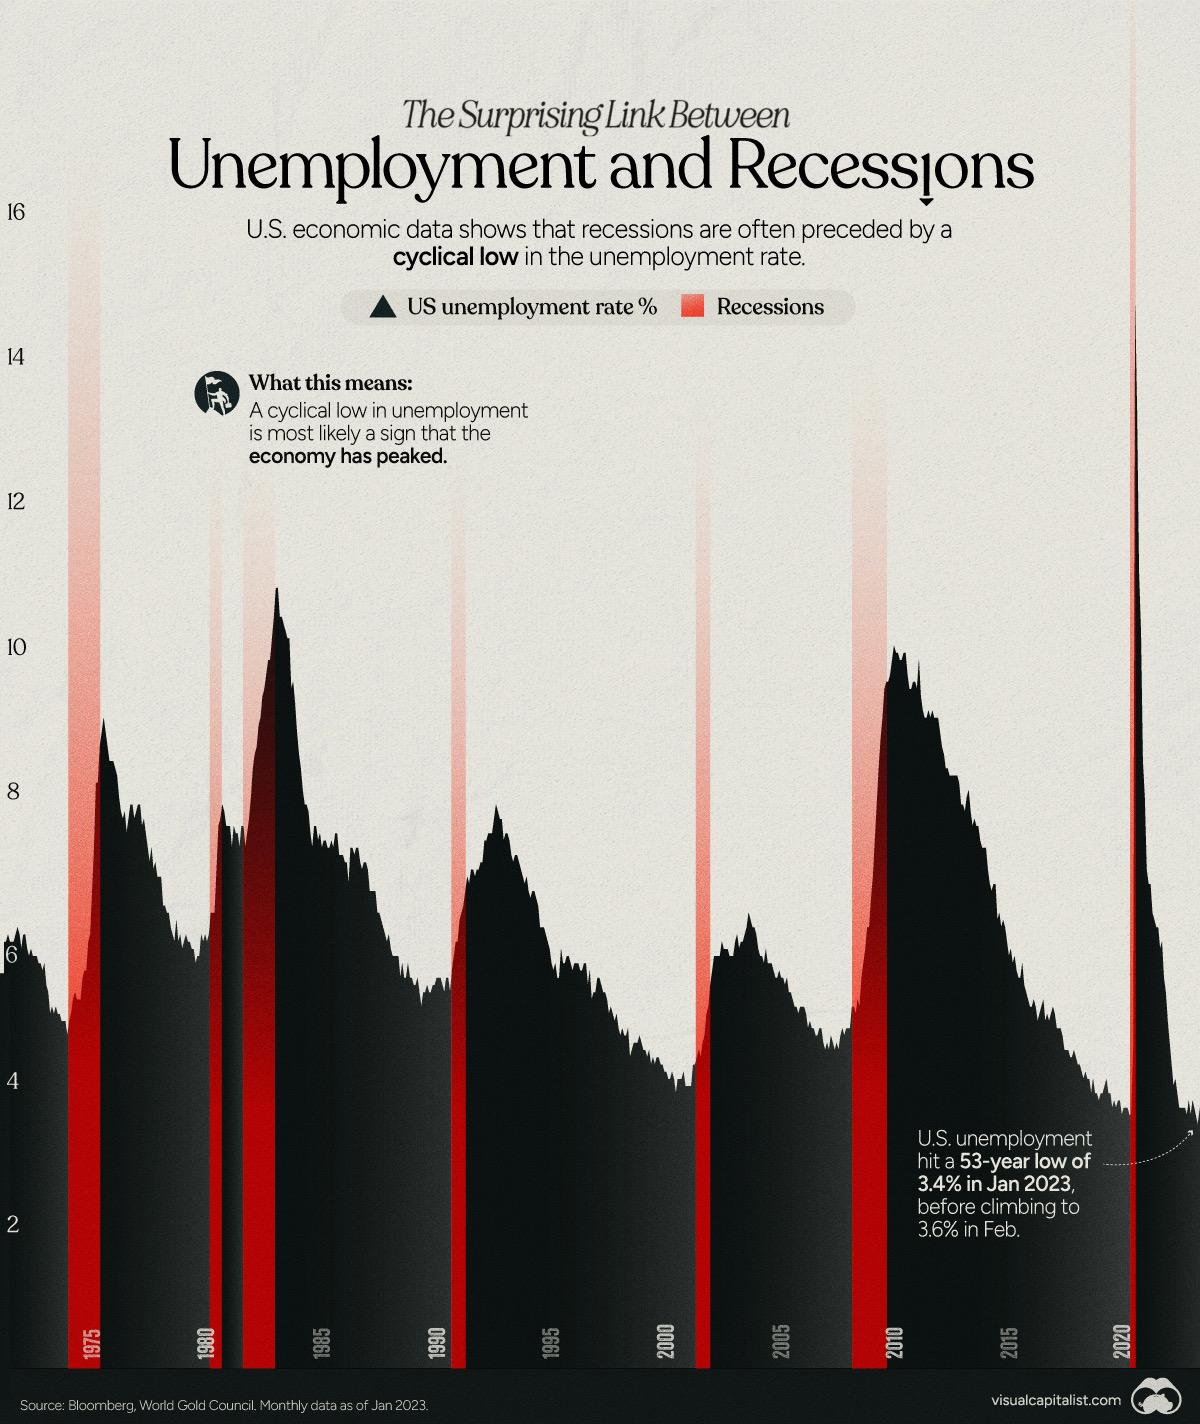 history of unemployment and recessions